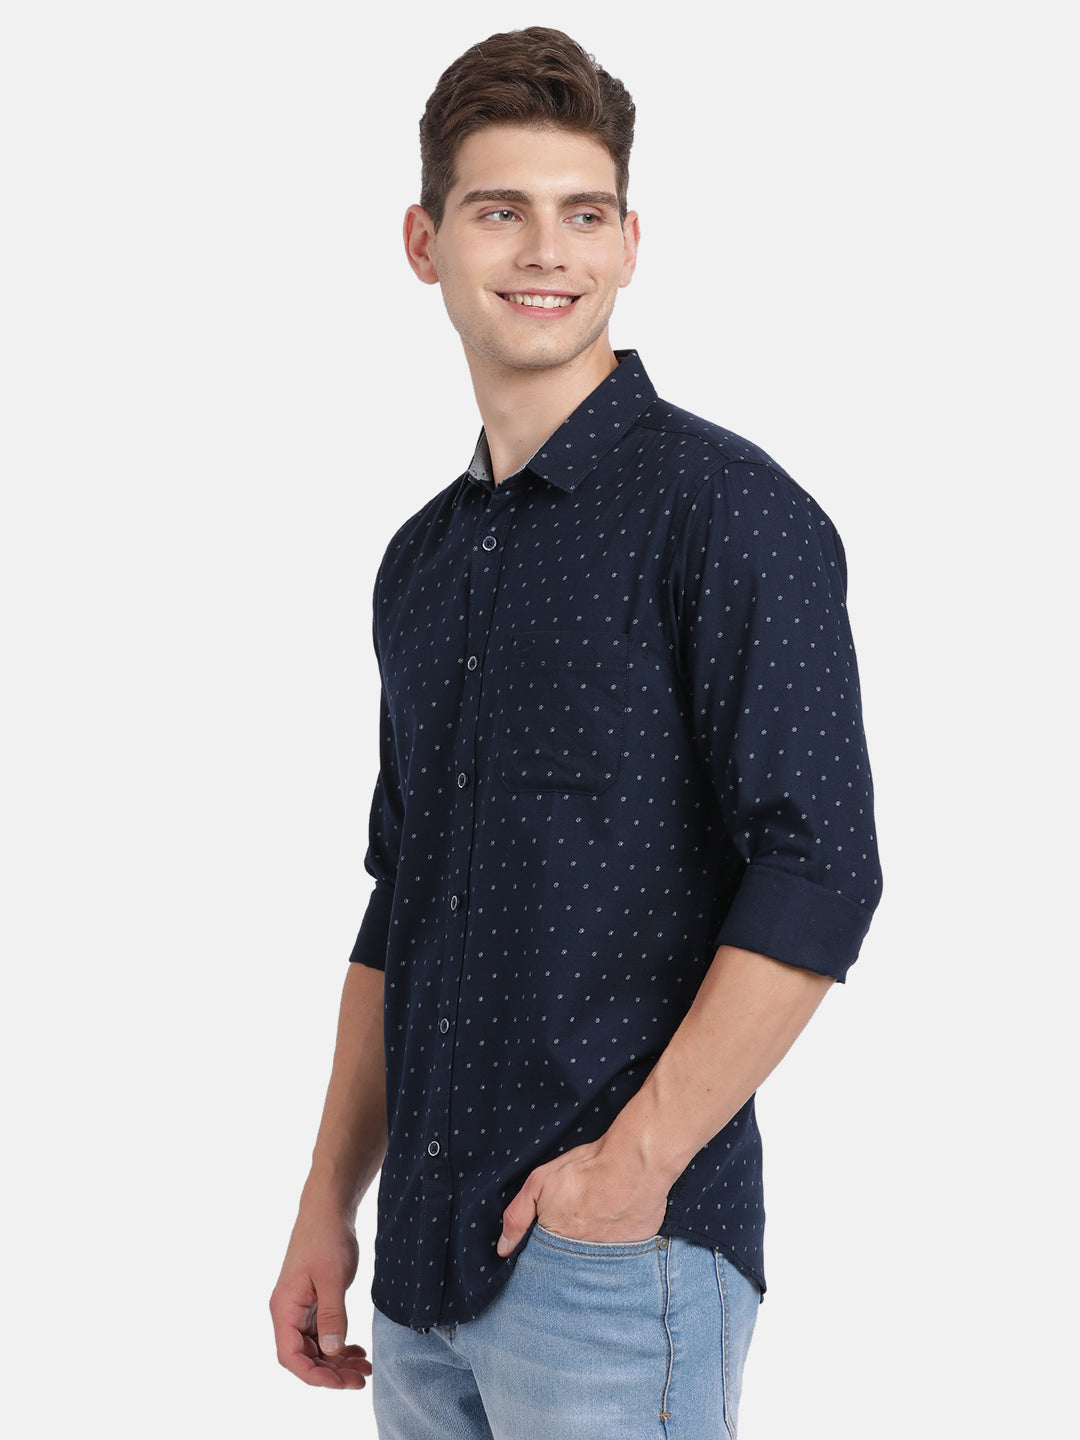 Crocodile Men's Casual Full Sleeve Slim Fit Printed Navy With Collar Shirt Online